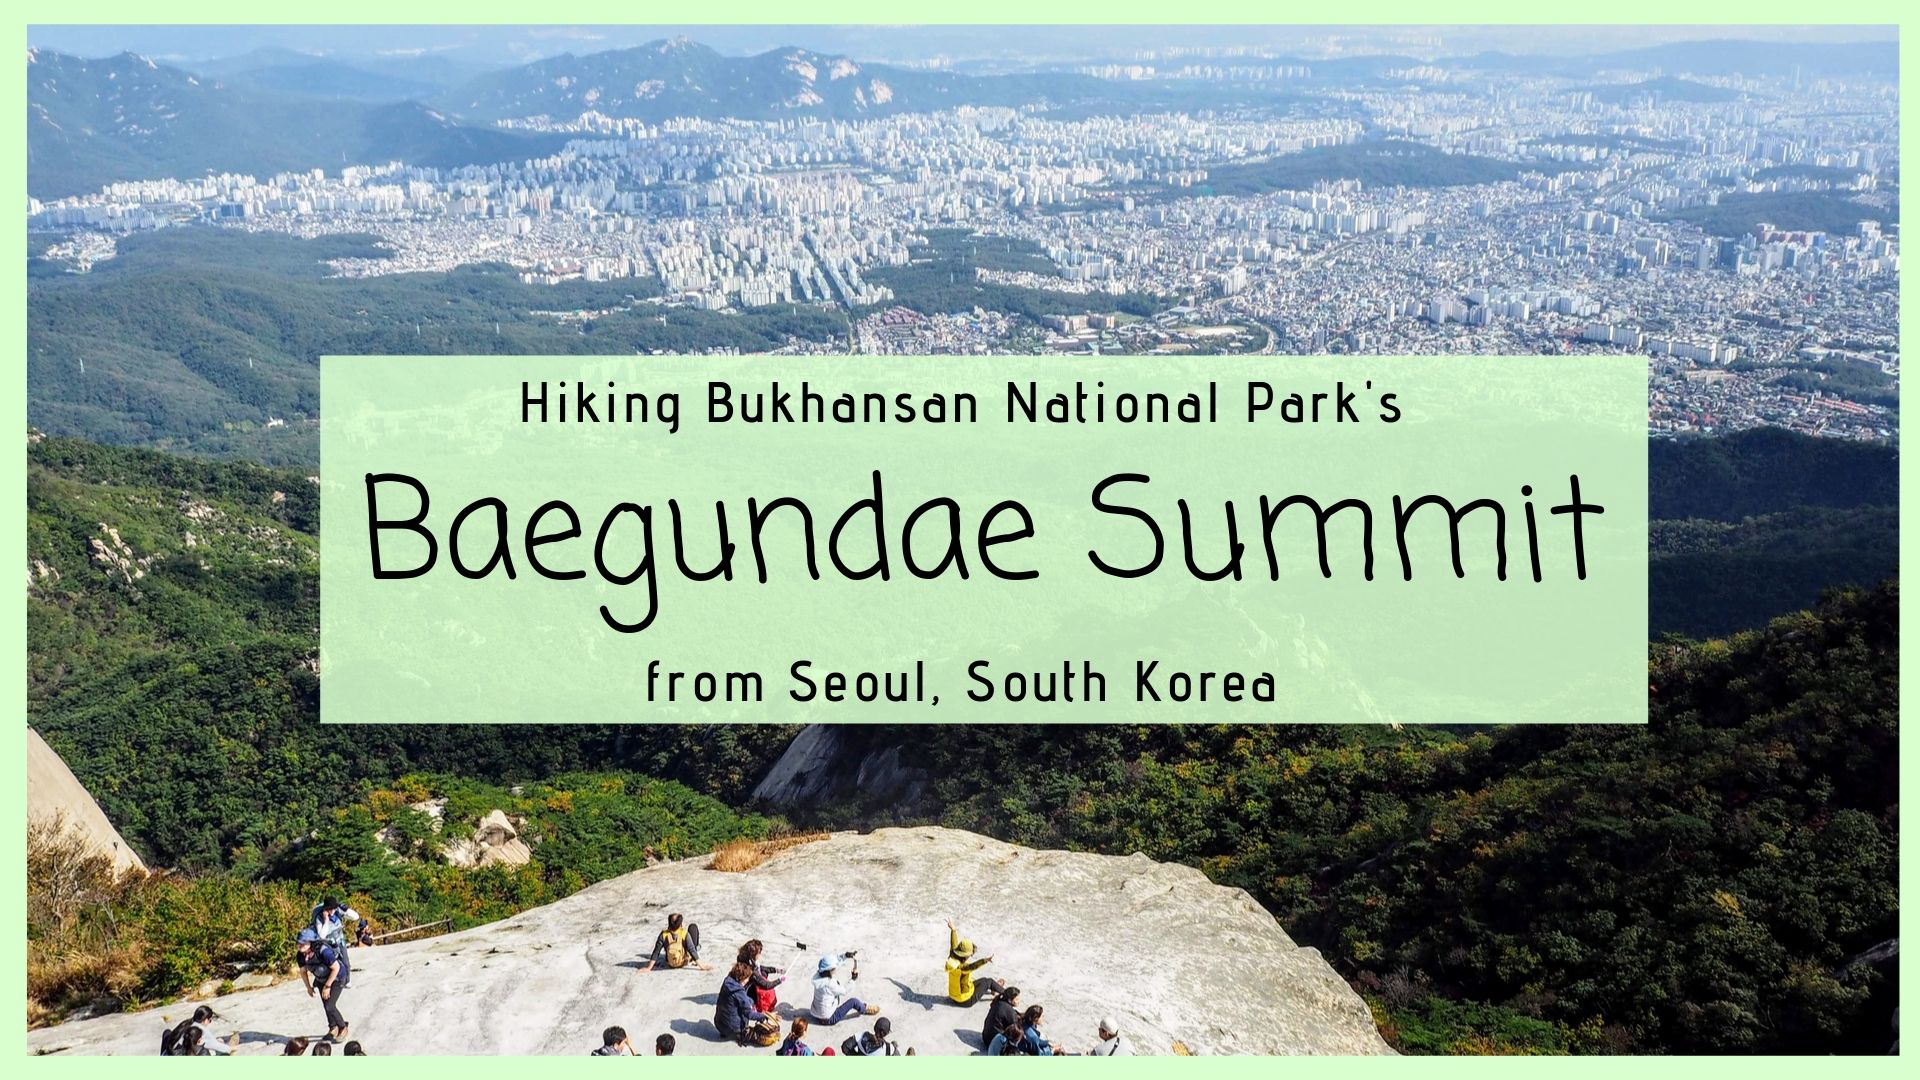 Baegundae Summit hike in Bukhansan National Park, from Seoul, South Korea. How to get there, what to expect hiking cover